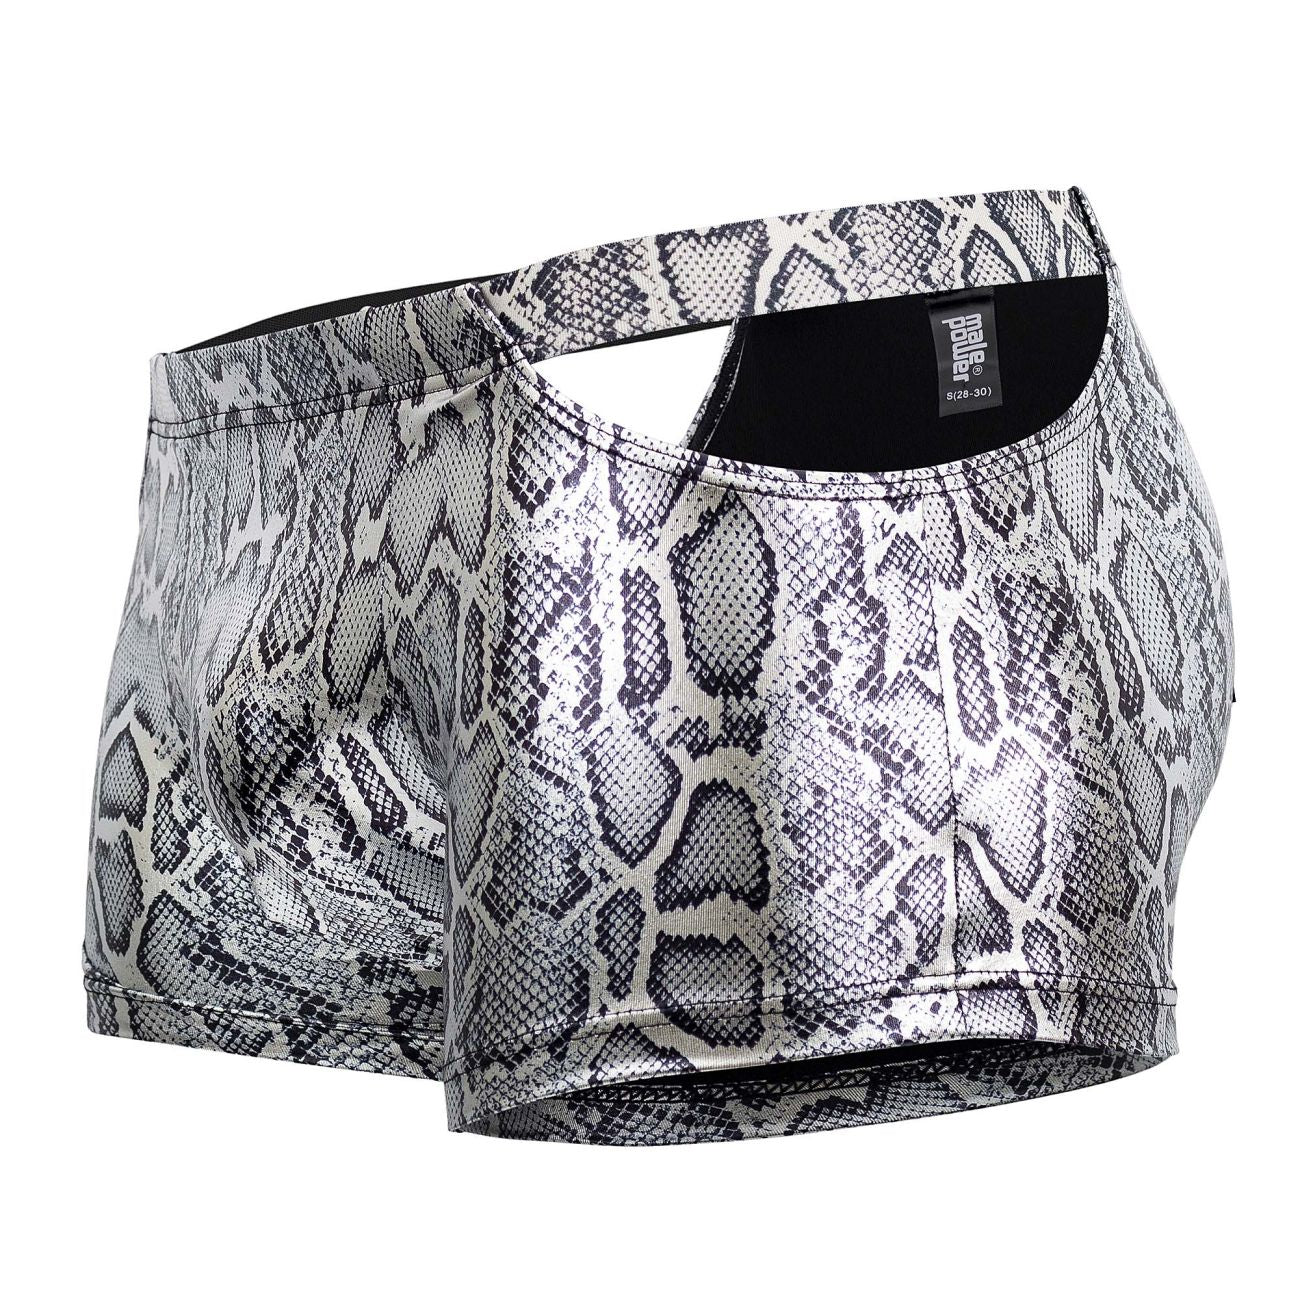 Male Power 153-282 S-naked Pouch Short Silver-Black